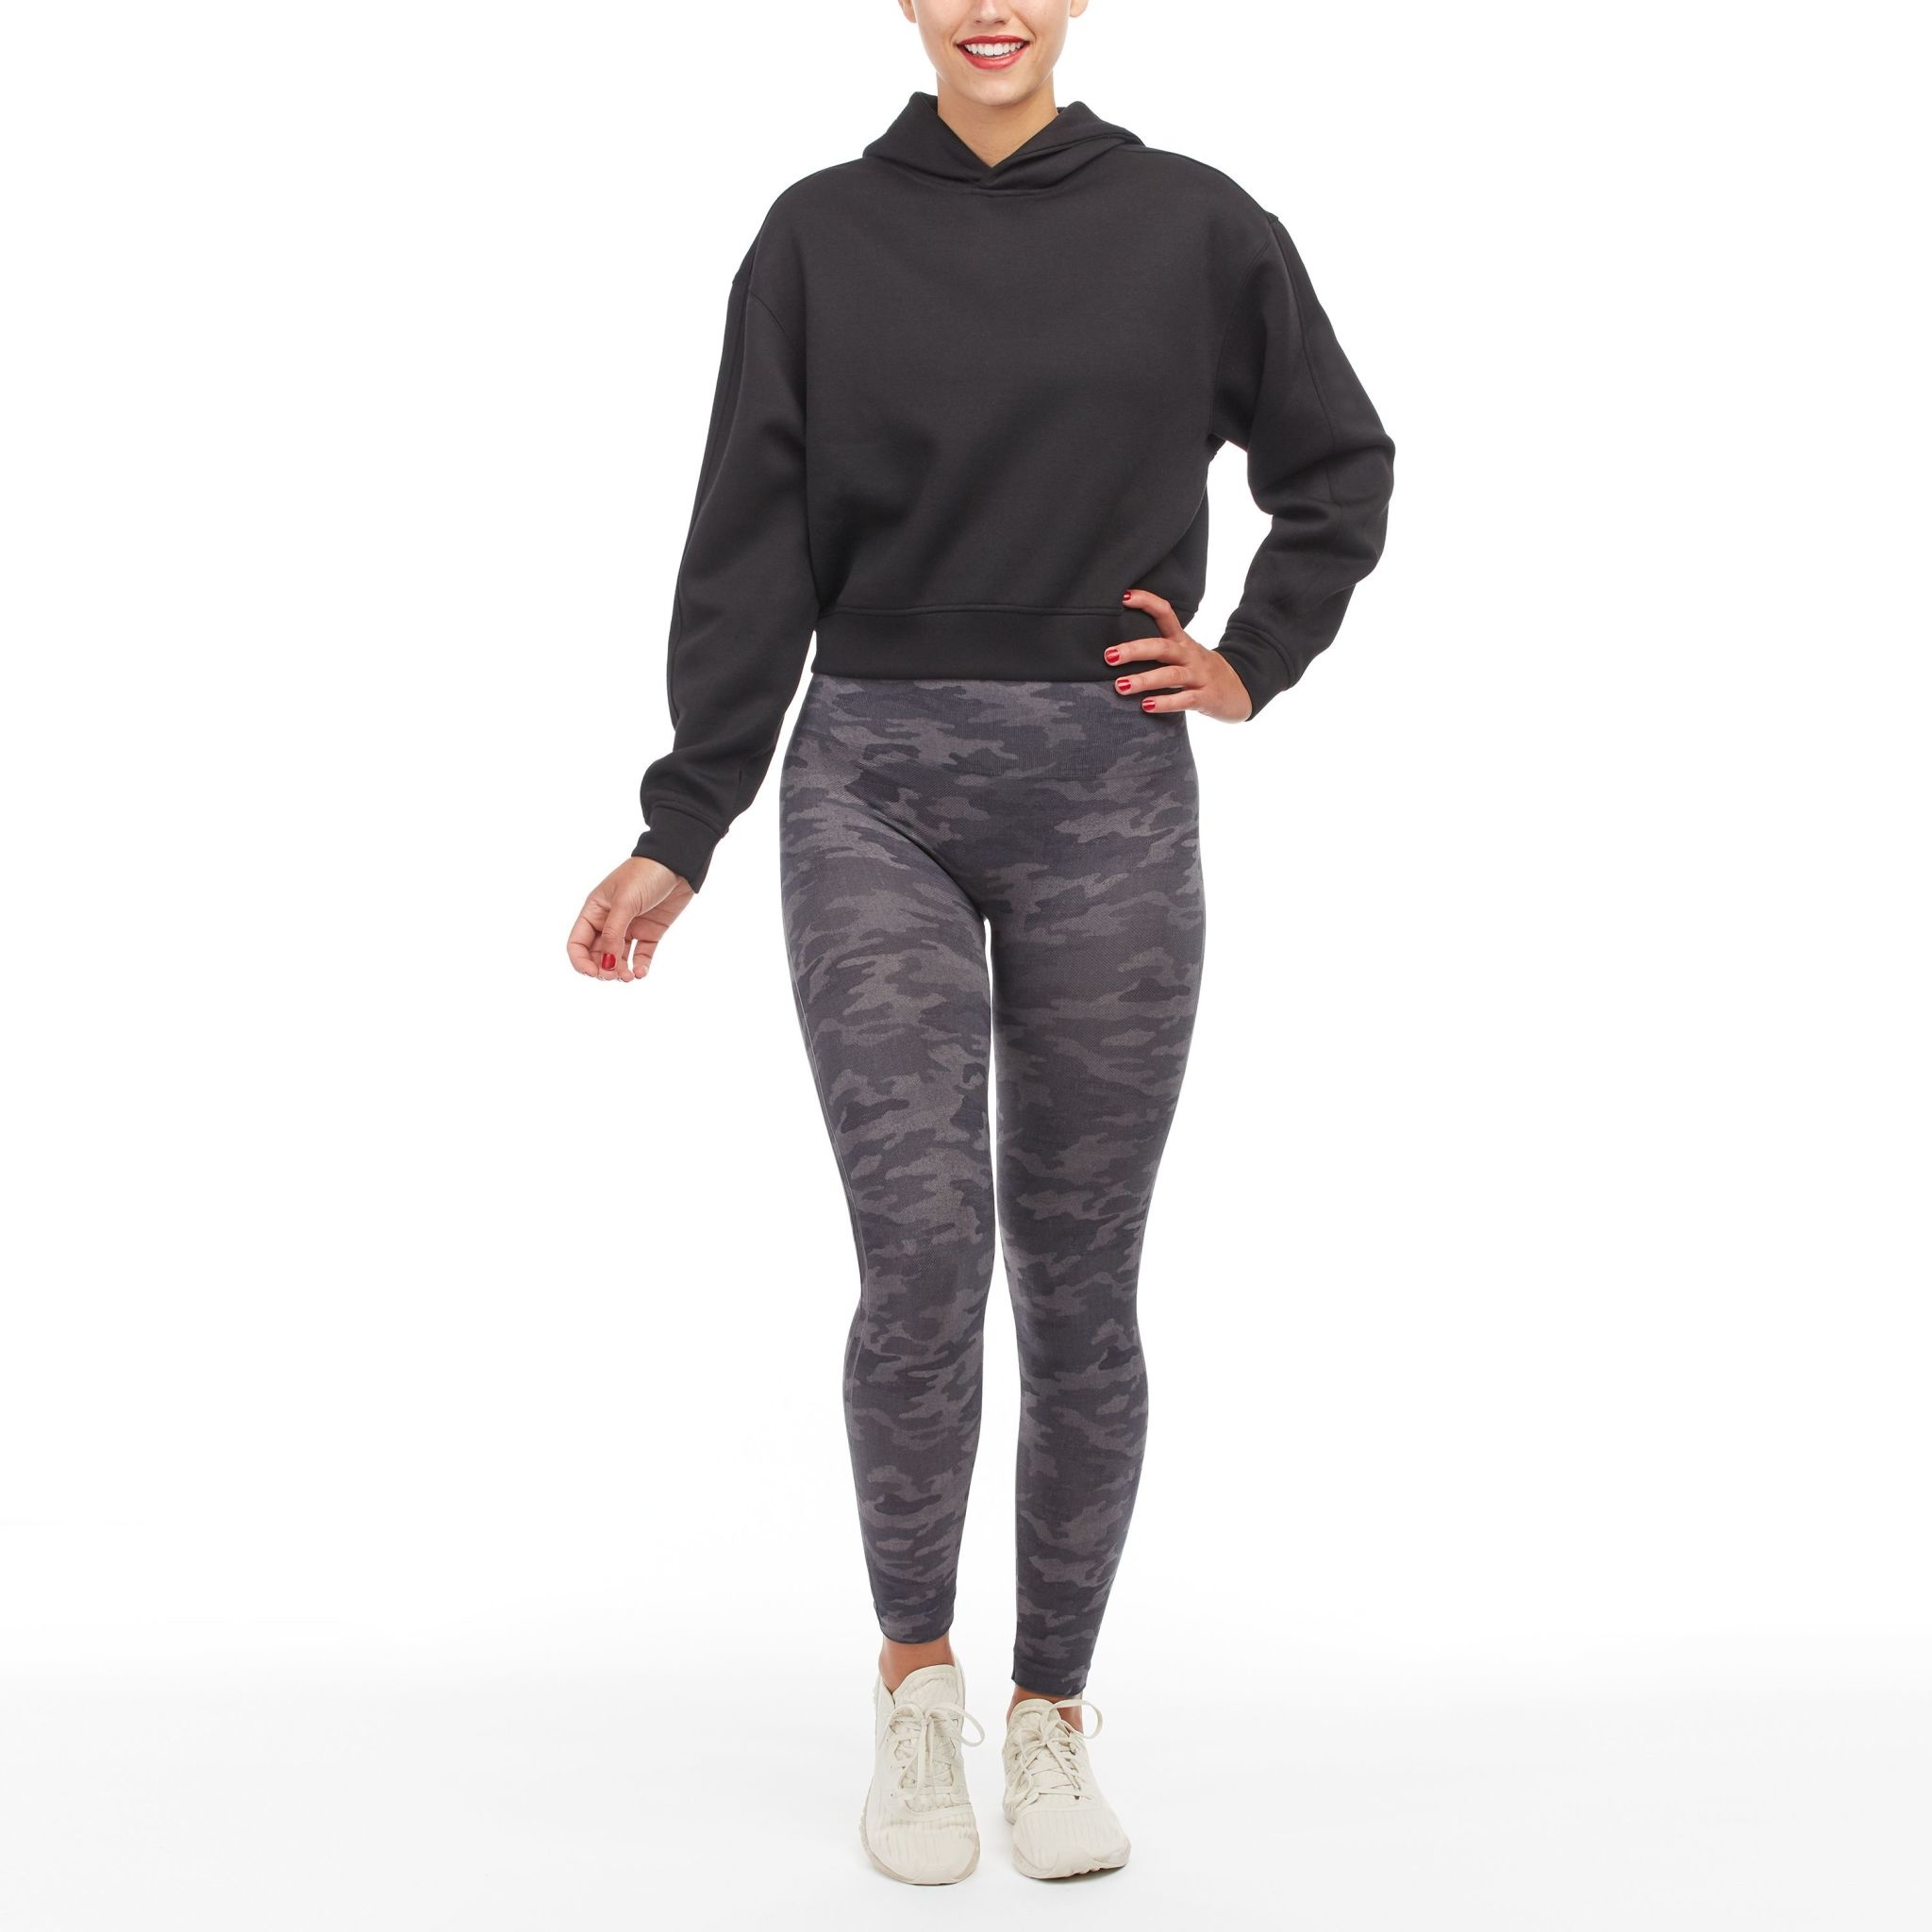 Spanx Look At Me Now Seamless Leggings - Abraham's